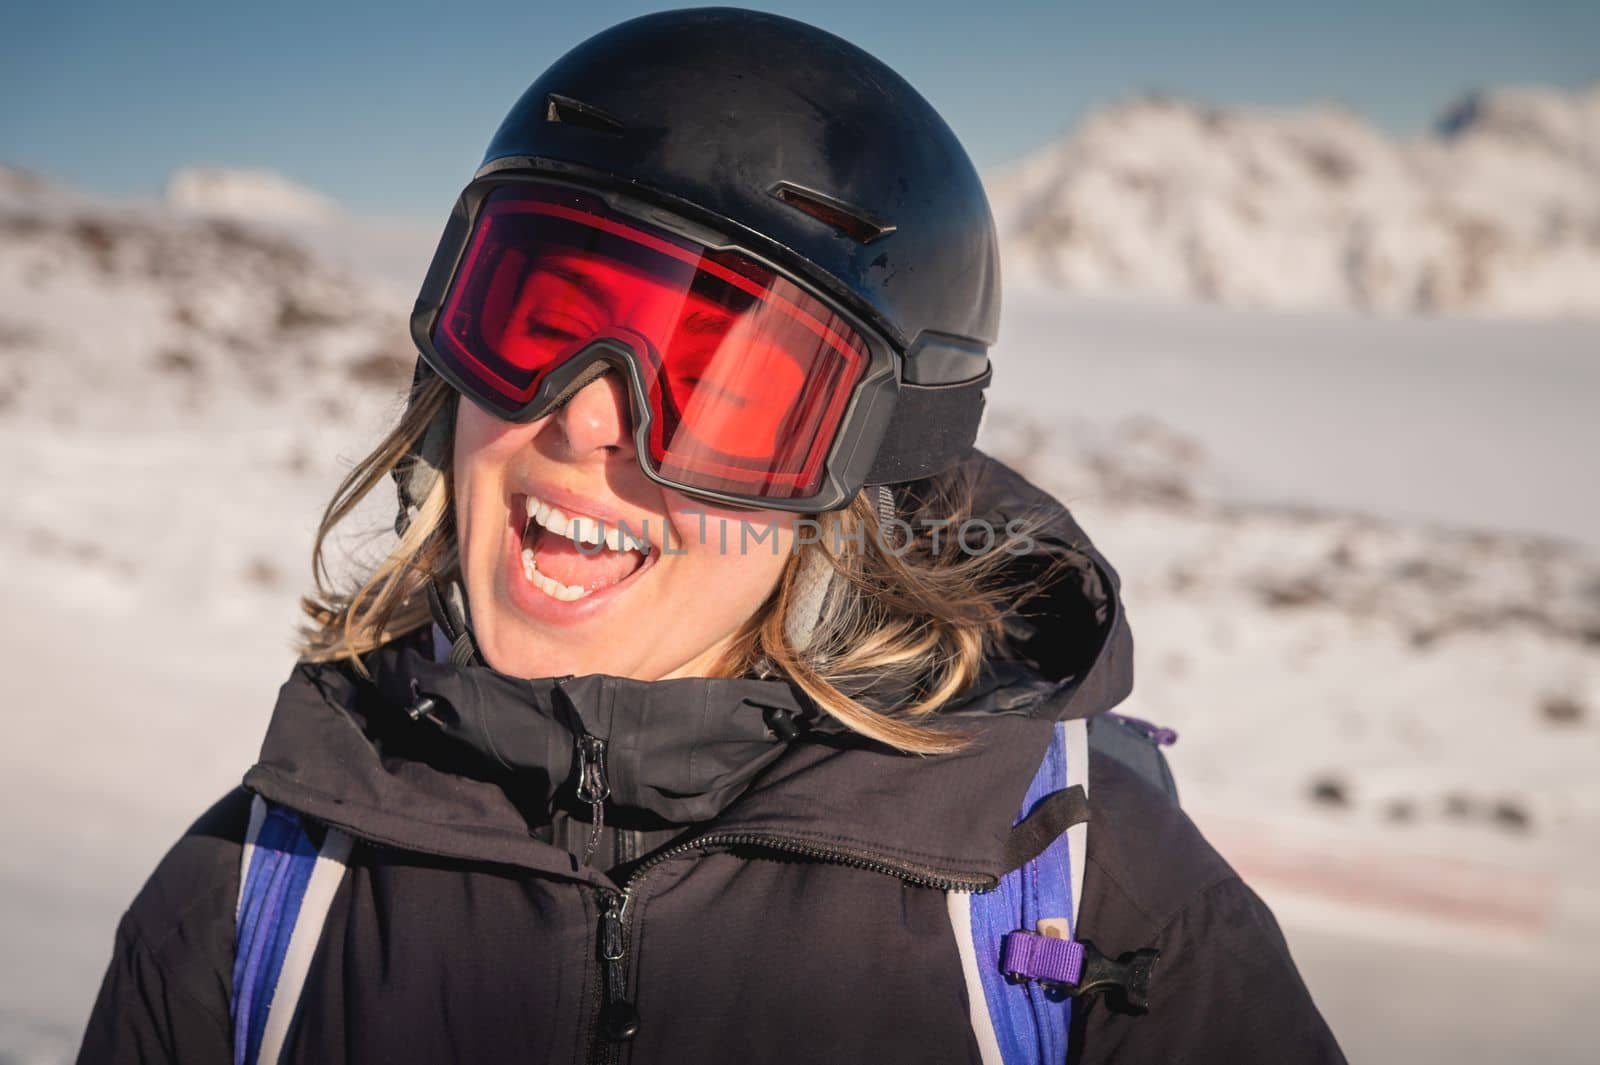 Portrait of a woman in the Alps. Smiling young woman in ski goggles and helmet stopped while skiing in ski resort by yanik88